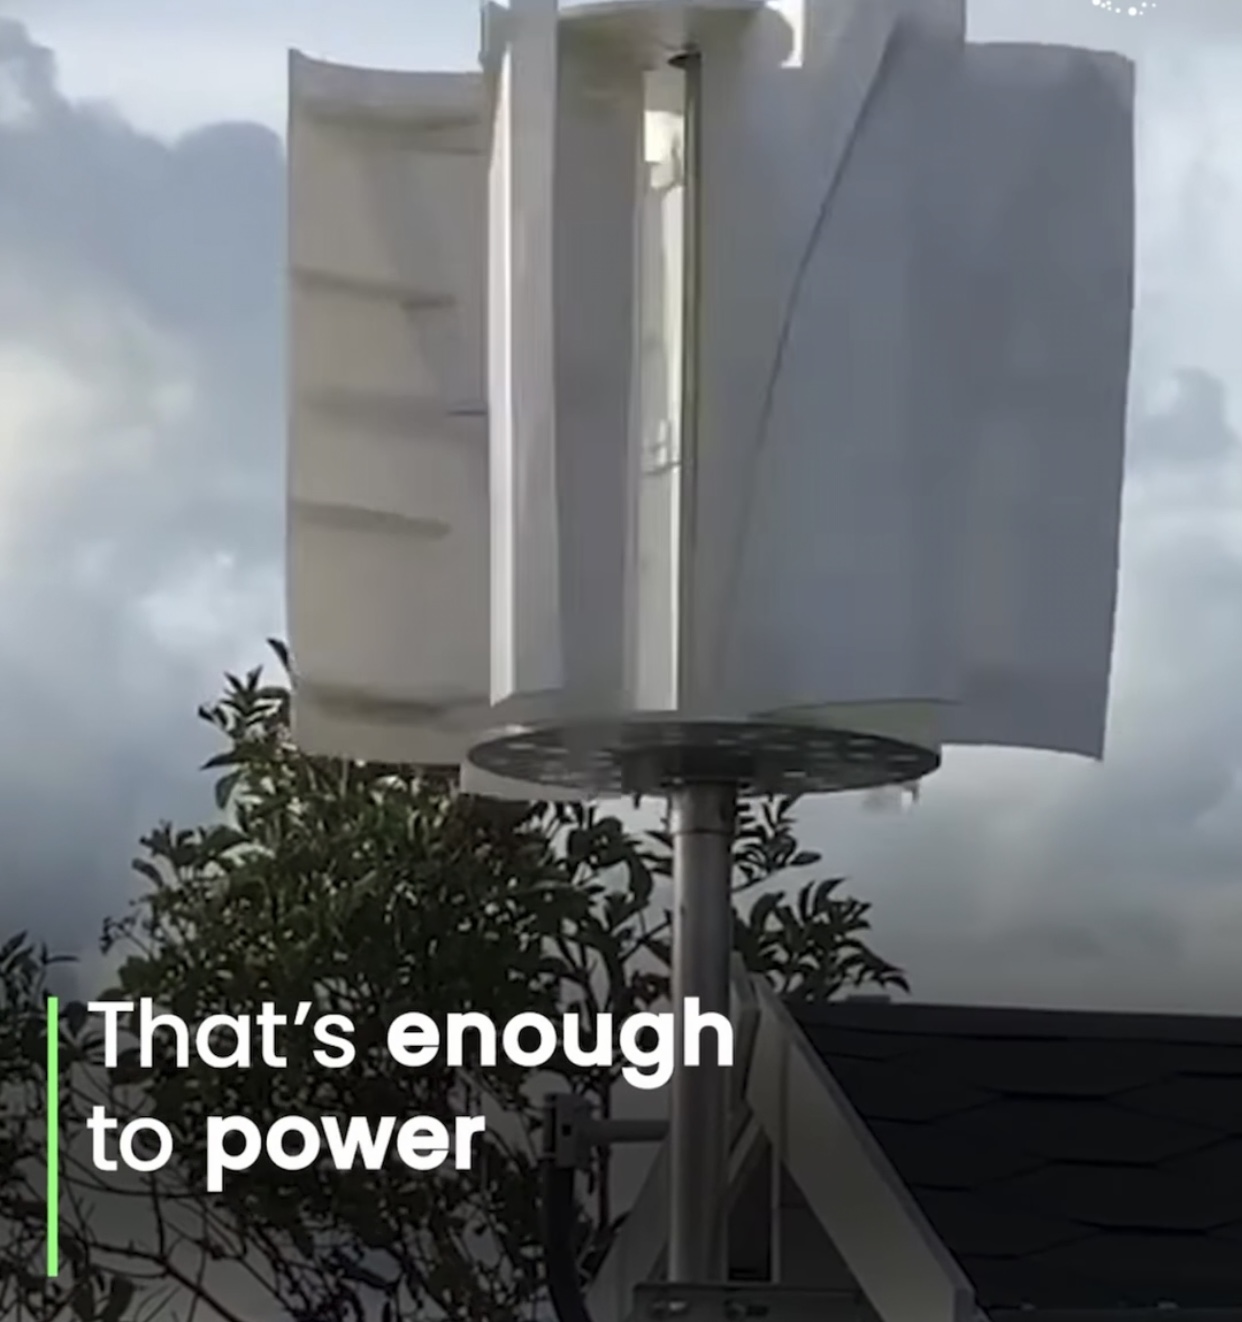 Residential wind turbines can power your home